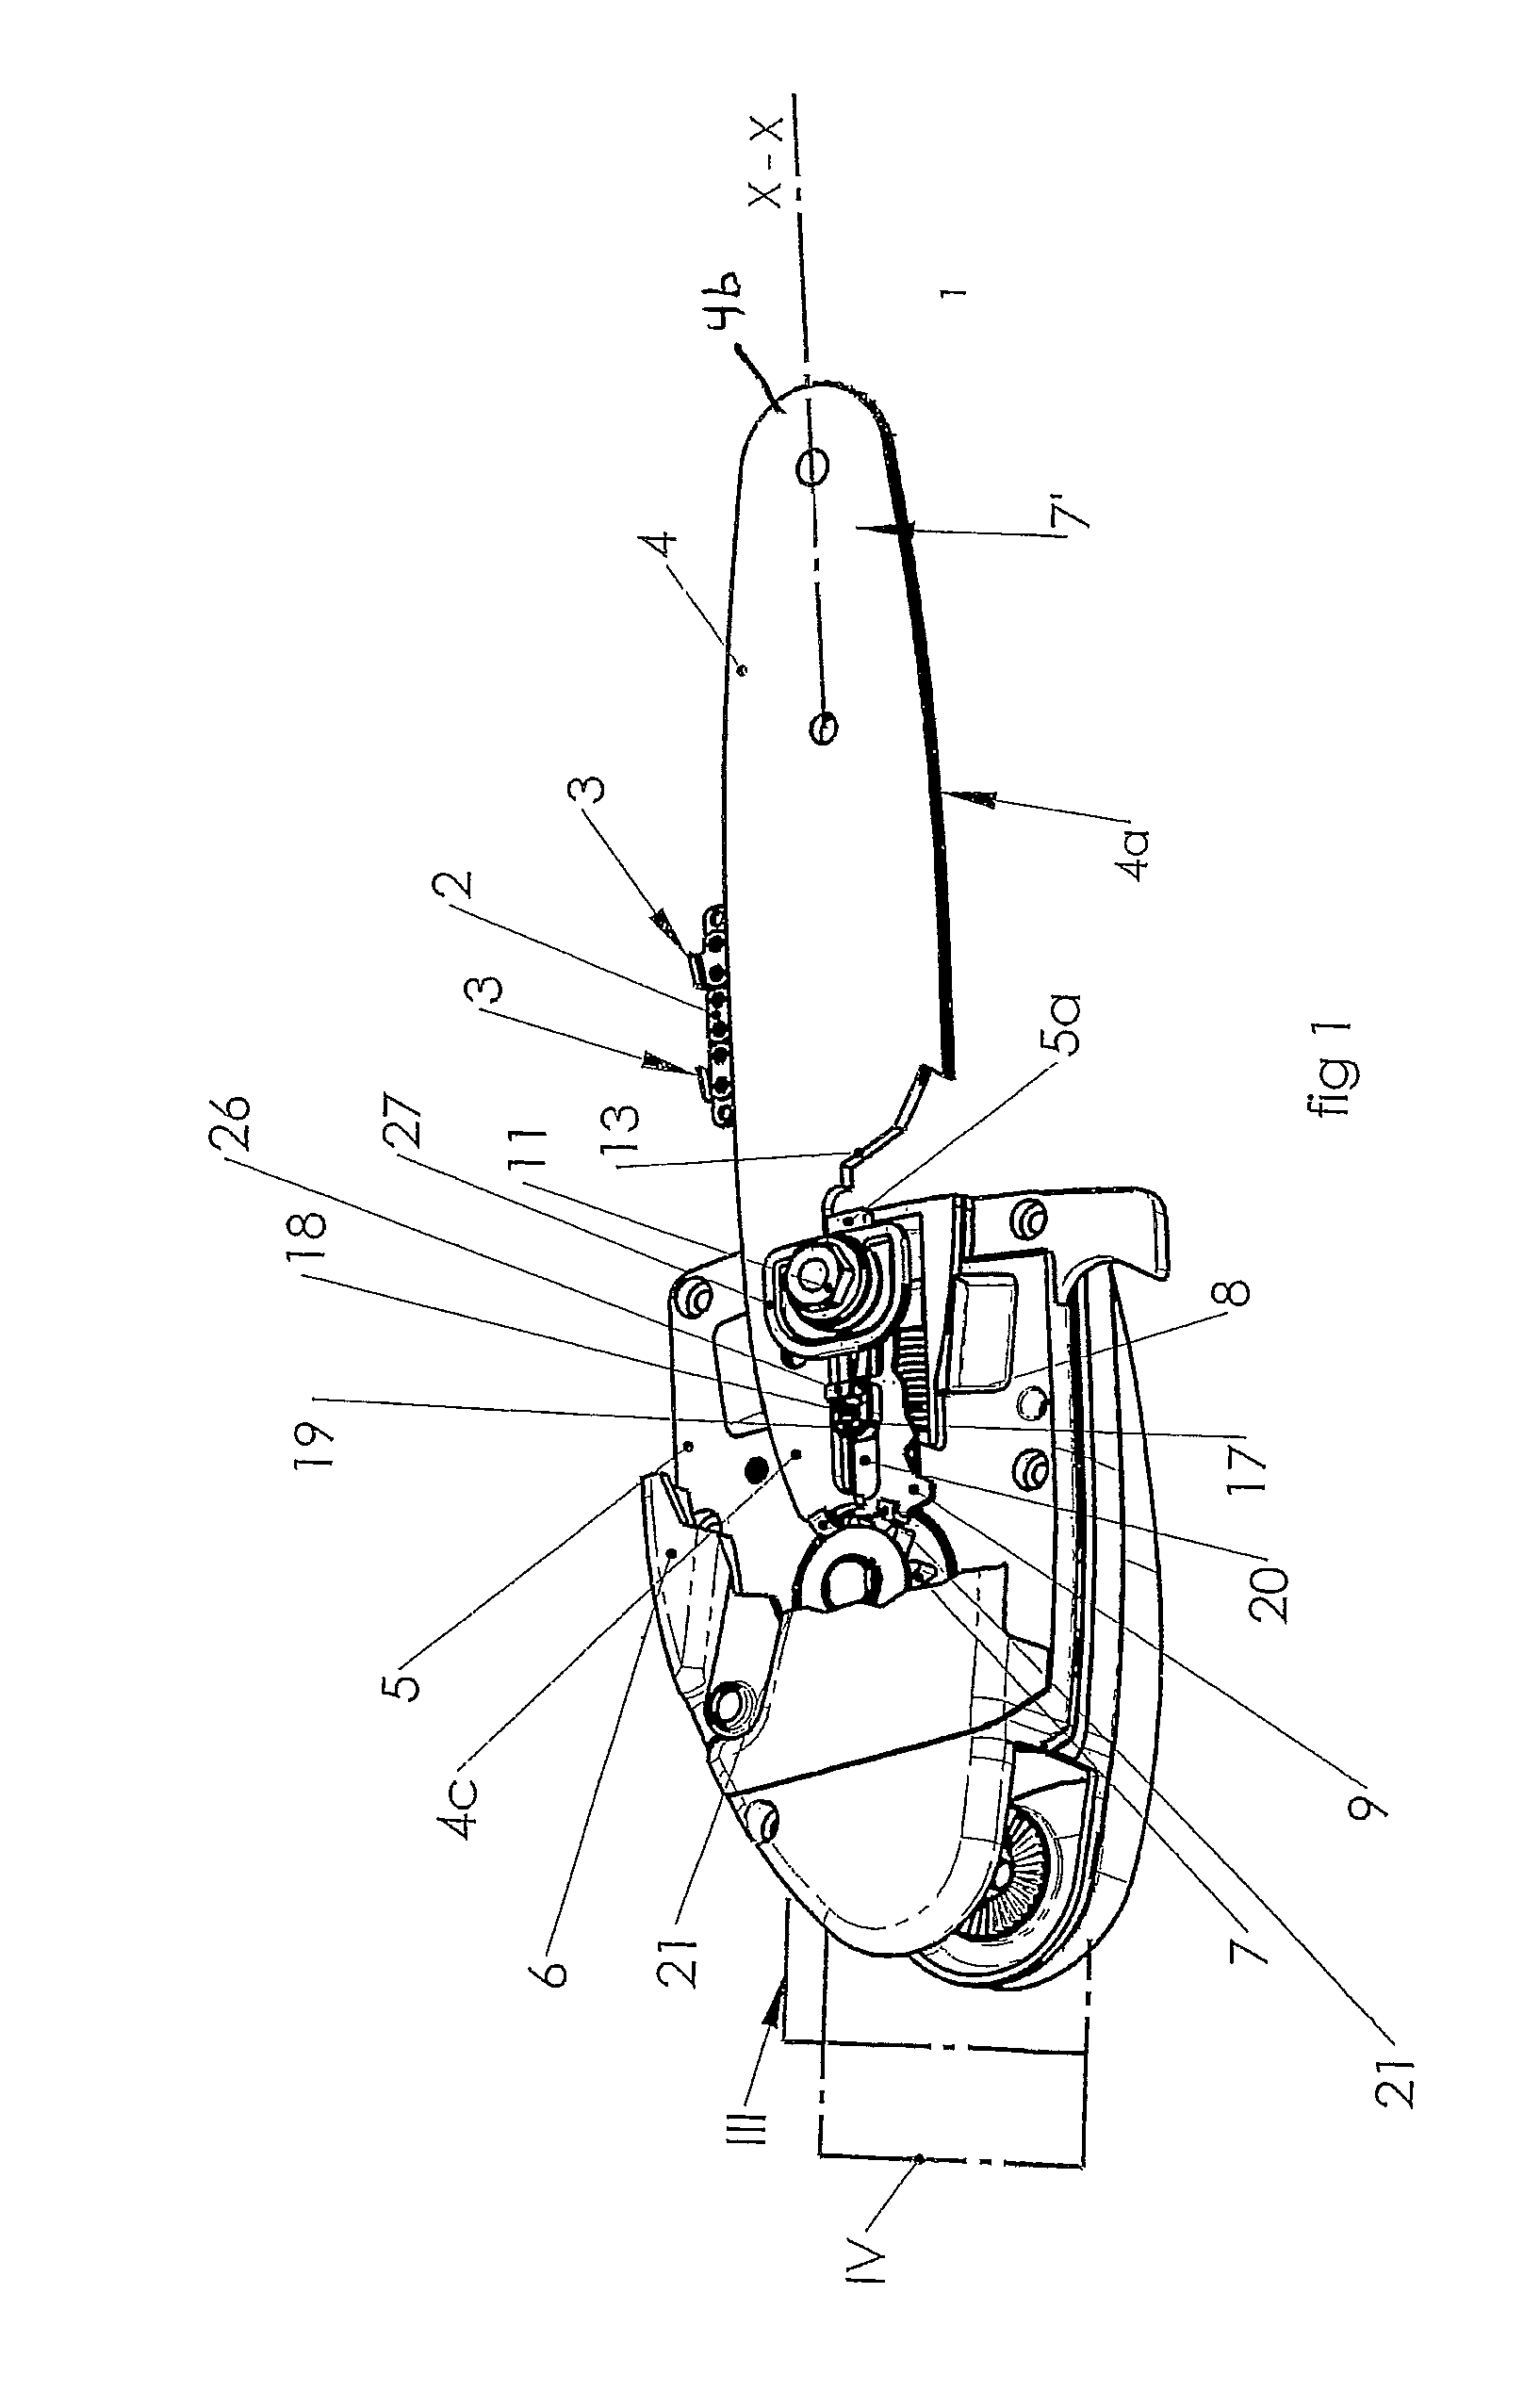 Chain saw with tension adjustment